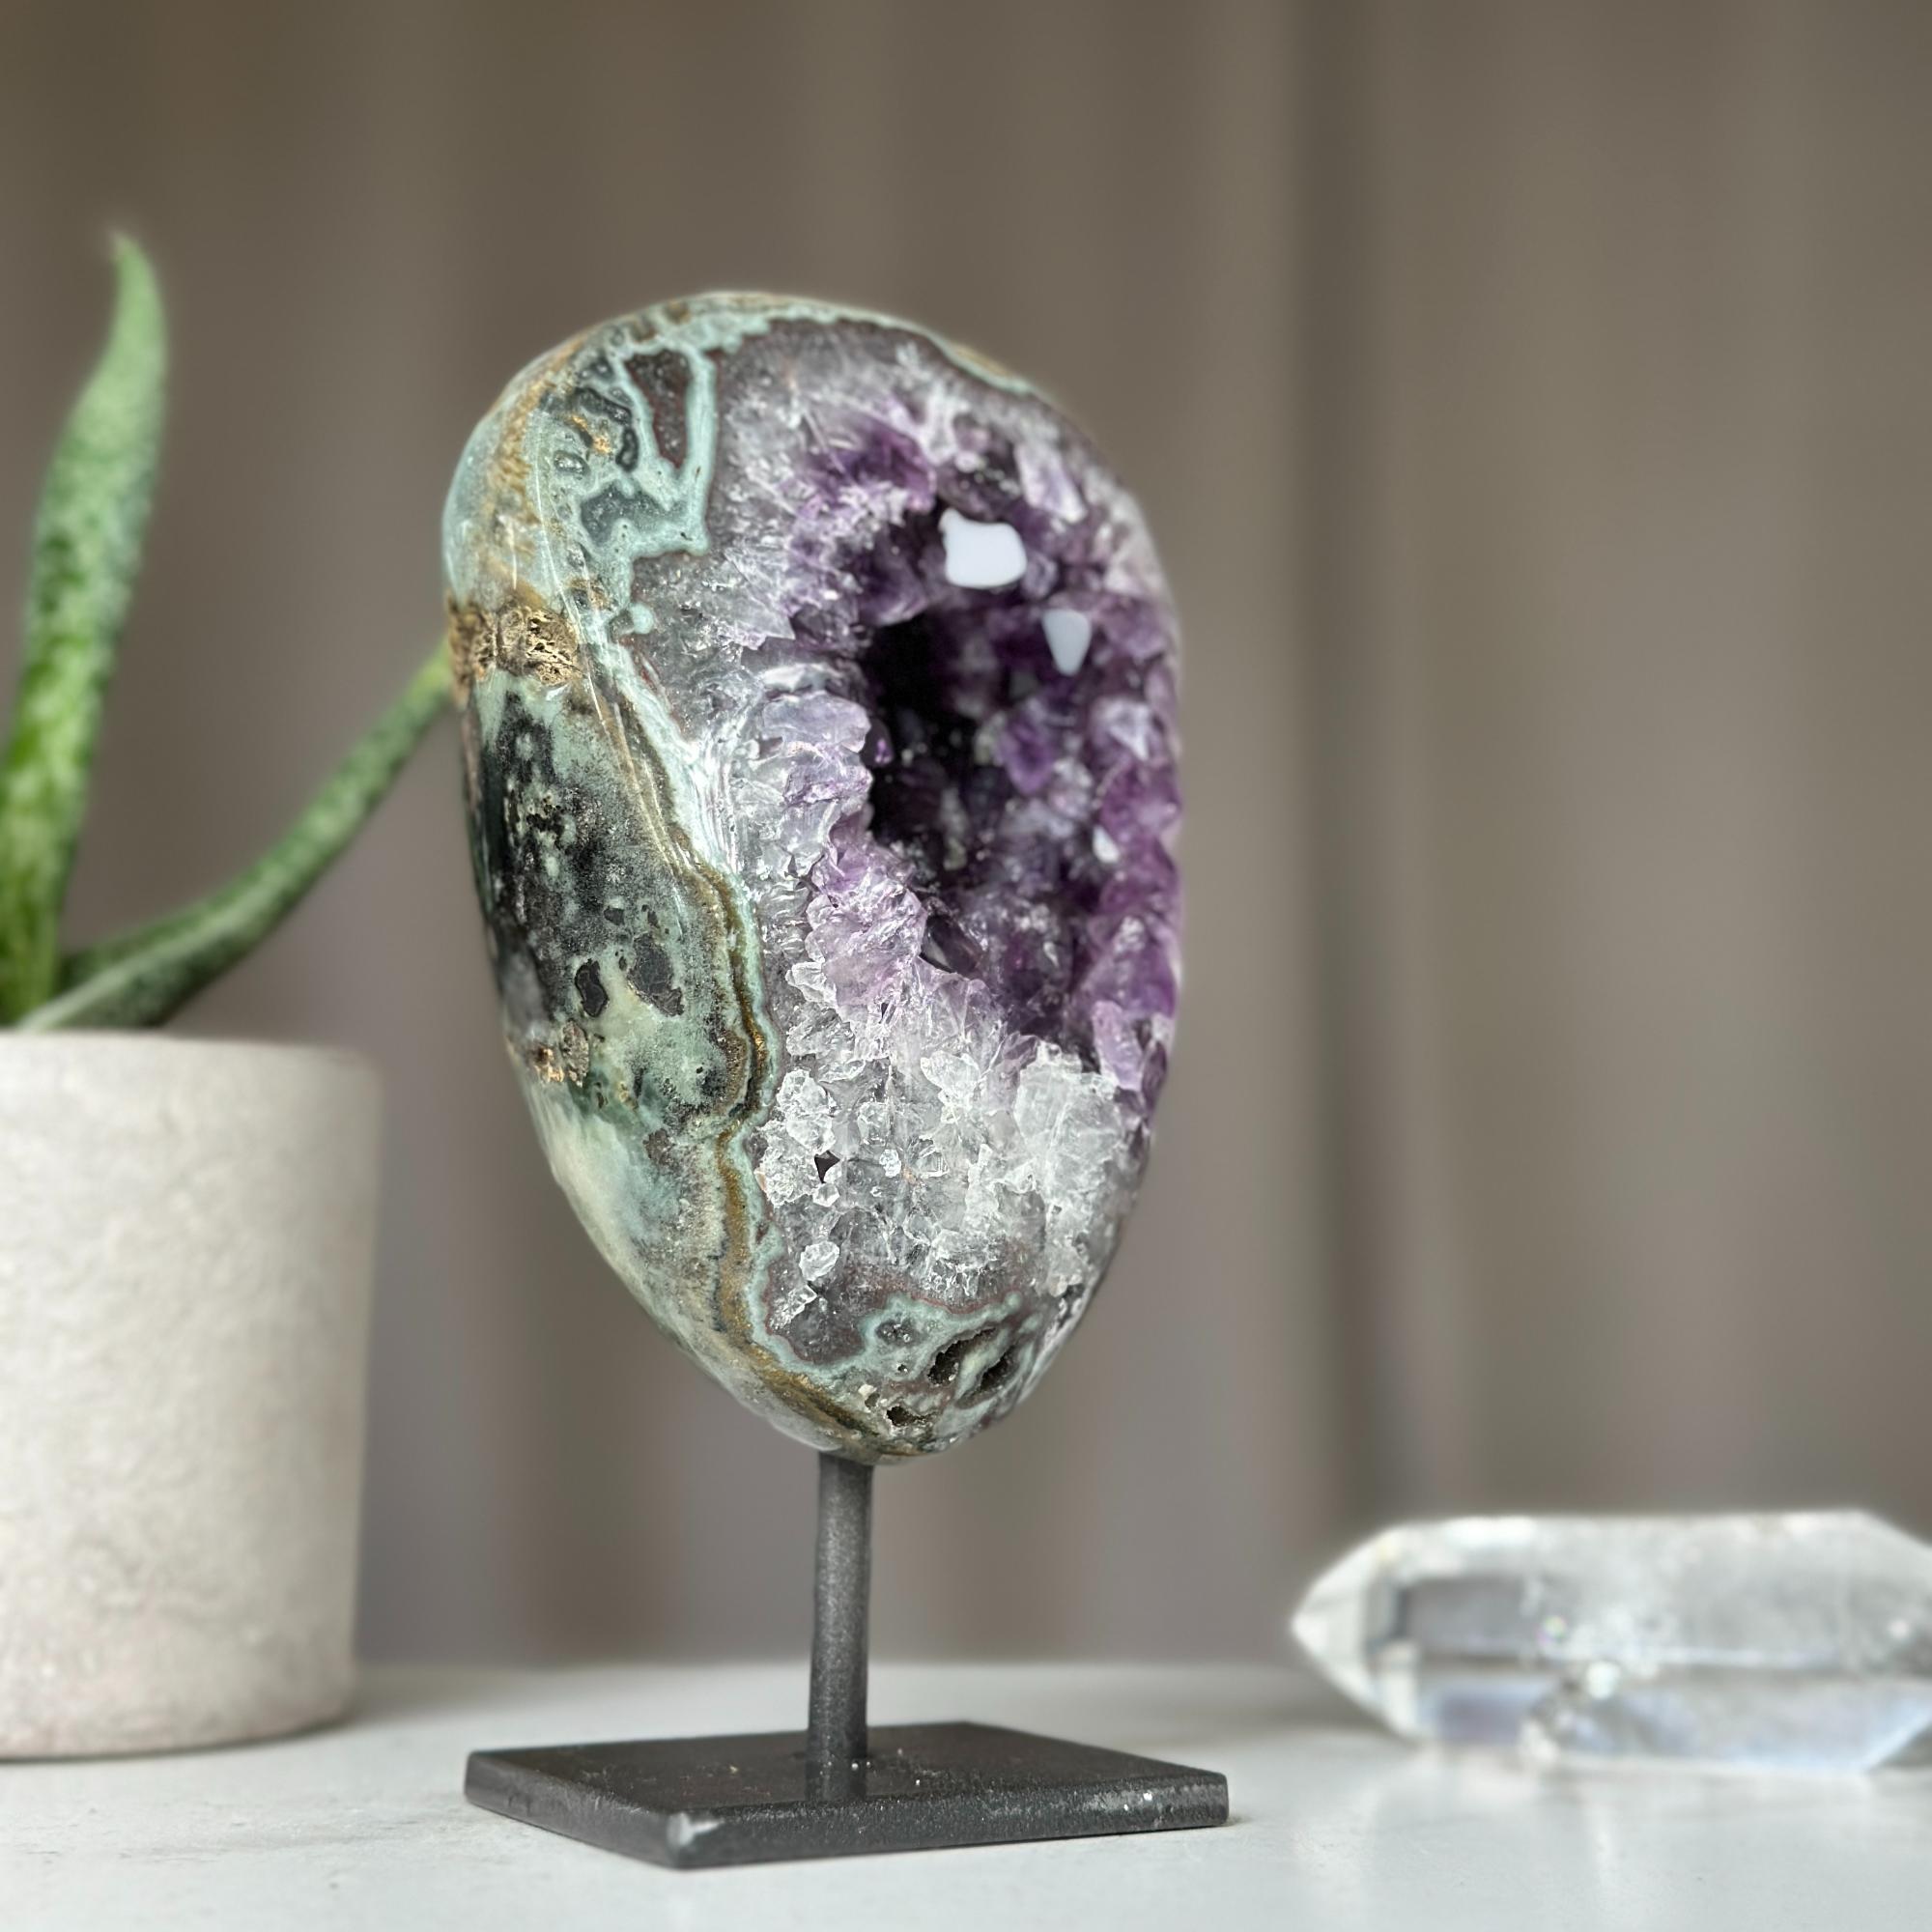 Deep Purple Amethyst Crystal Decor piece with metallic base included (6 in tall) Rare crystal for home decoration